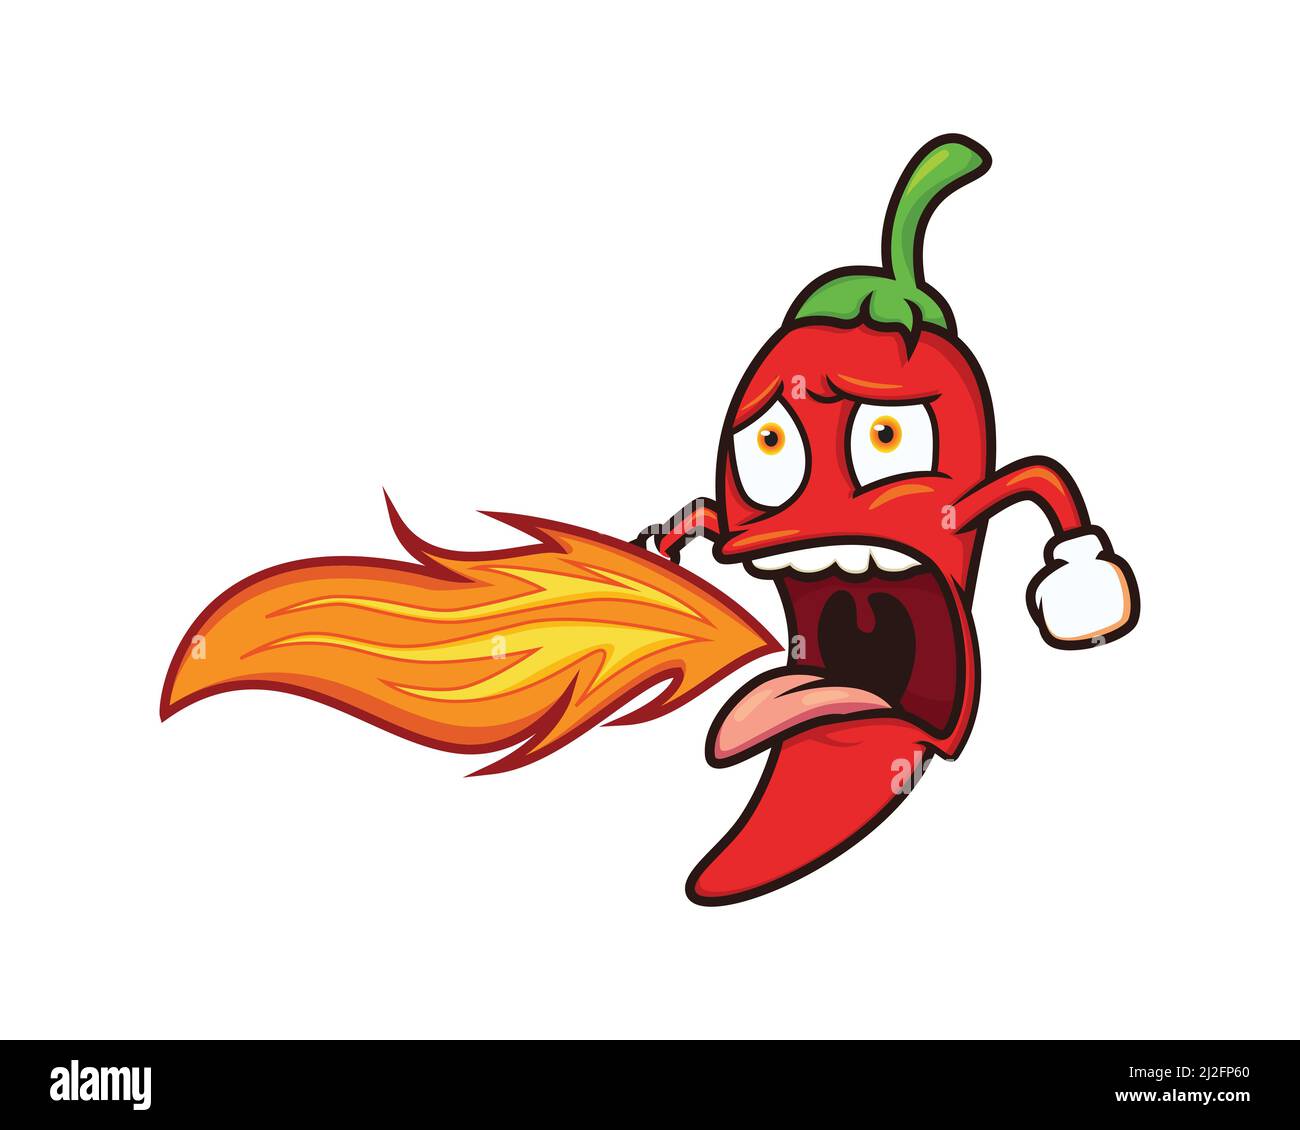 Chili Breathing with Spicy Flame Mascot Illustration Vector Stock Vector